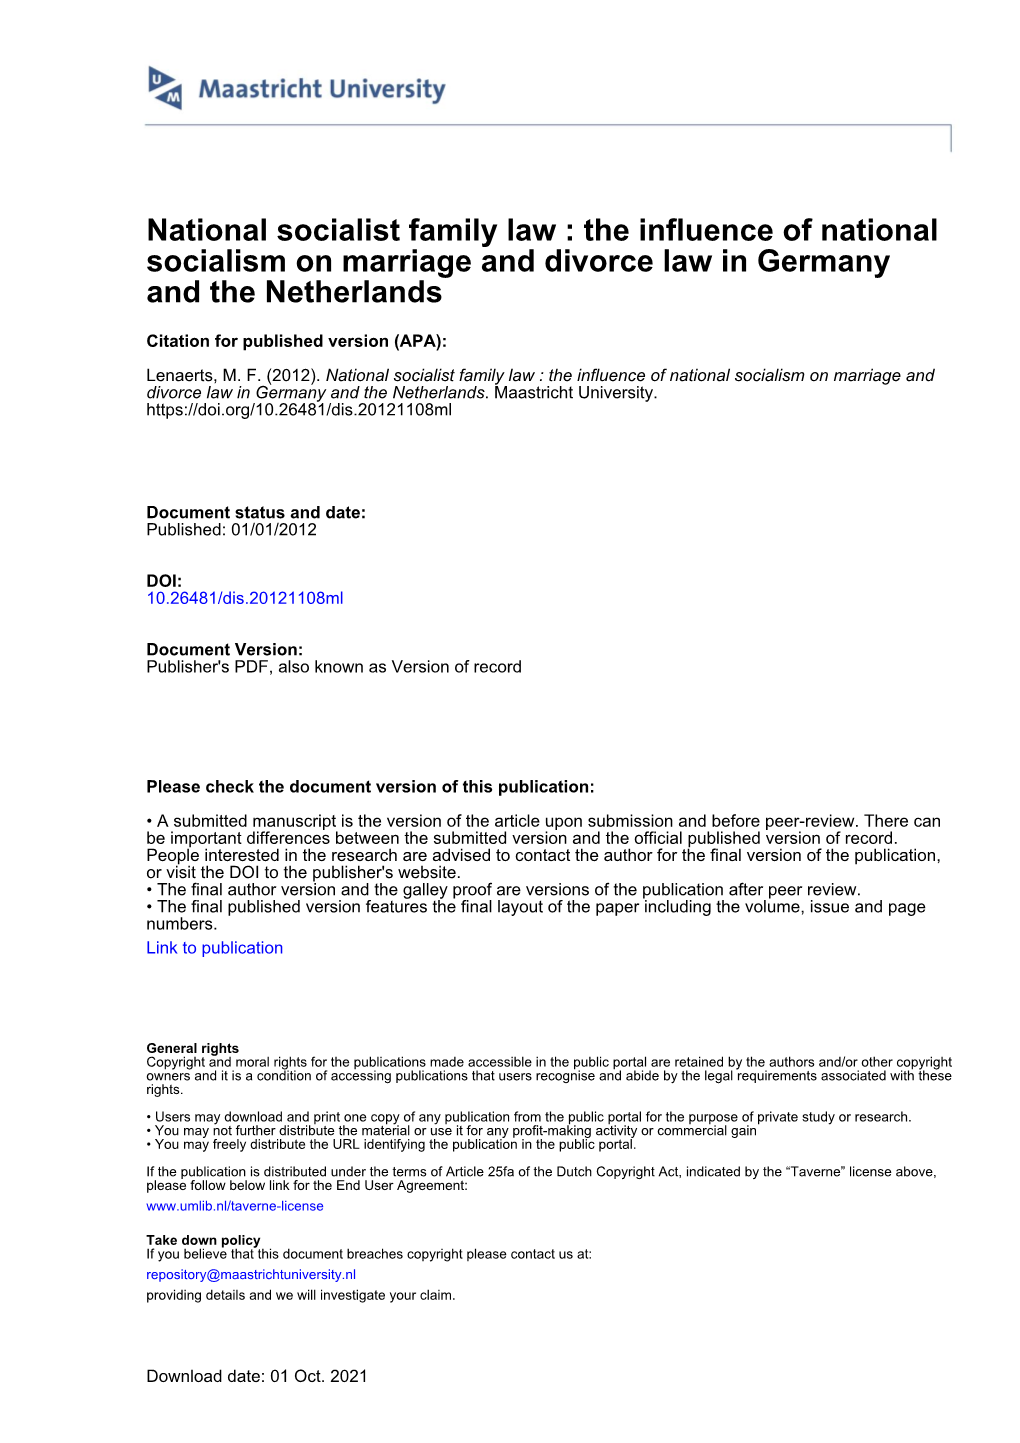 National Socialist Family Law : the Influence of National Socialism on Marriage and Divorce Law in Germany and the Netherlands